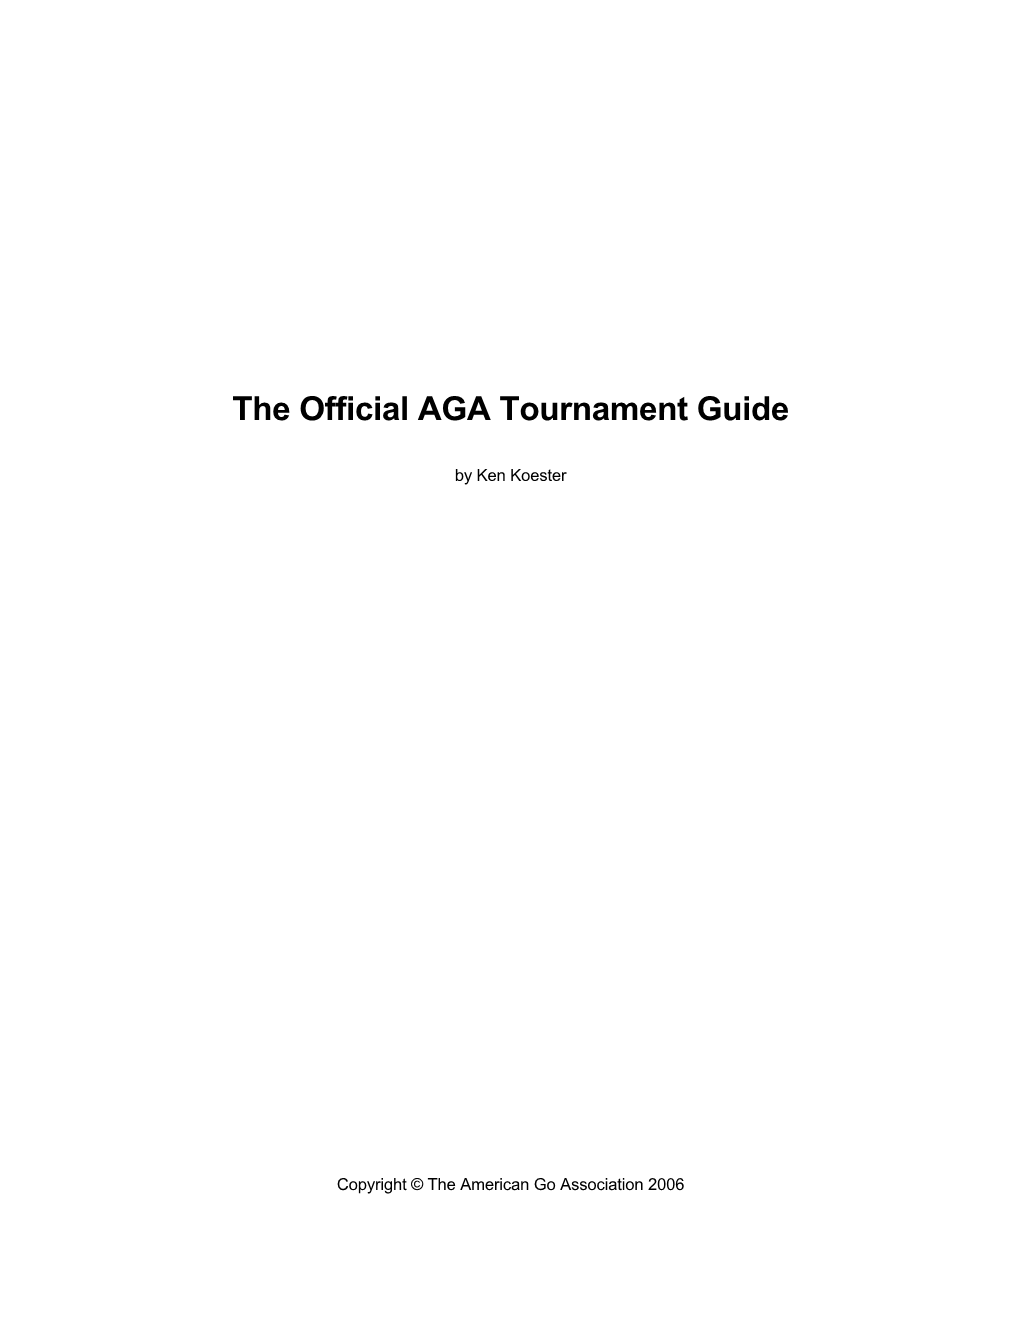 The Official AGA Tournament Guide